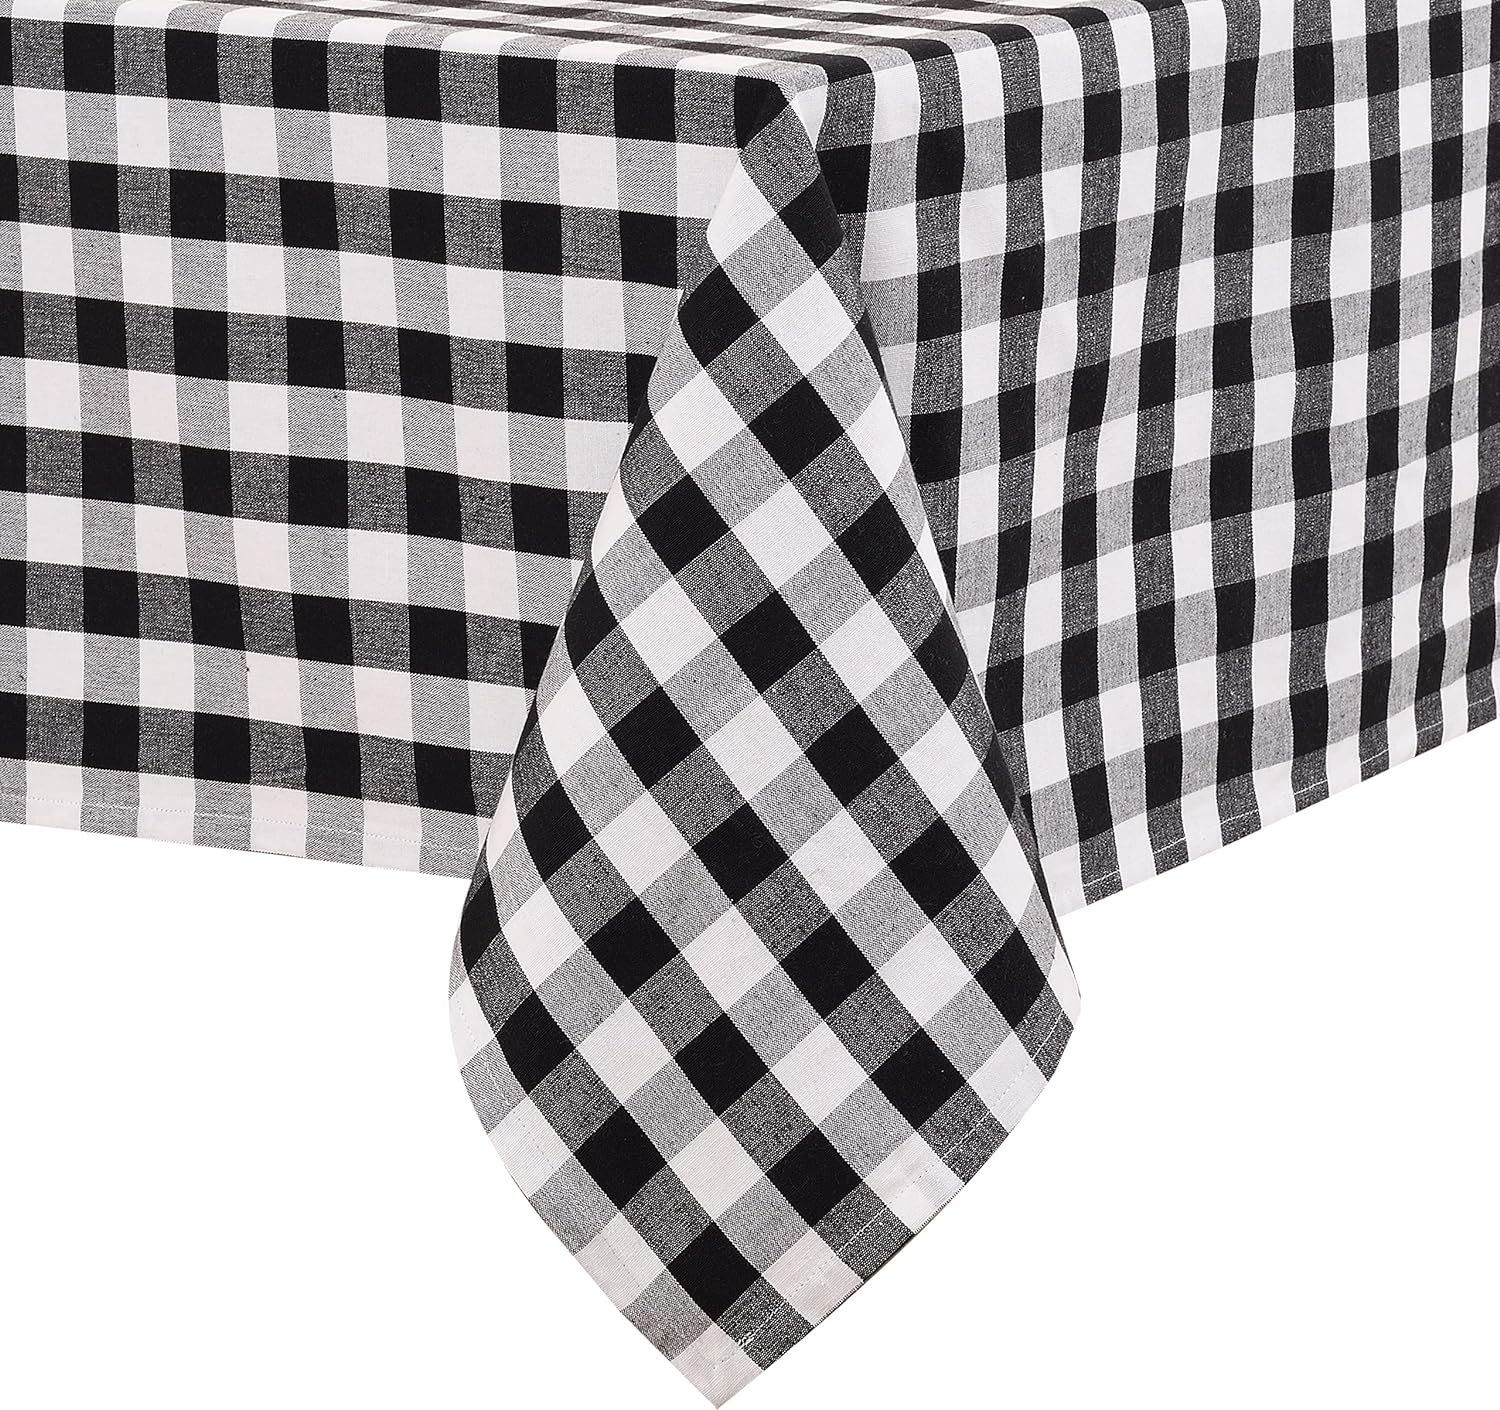 Urban Villa Tablecloth Buffalo Check Table Cloth Tabletop Cover Kitchen Dining Tablecloth 100% Cotton Great Parties Wedding Holiday Dinner Black/White Rectangle 60X102 Inches 8-10 Seats Table Cloth